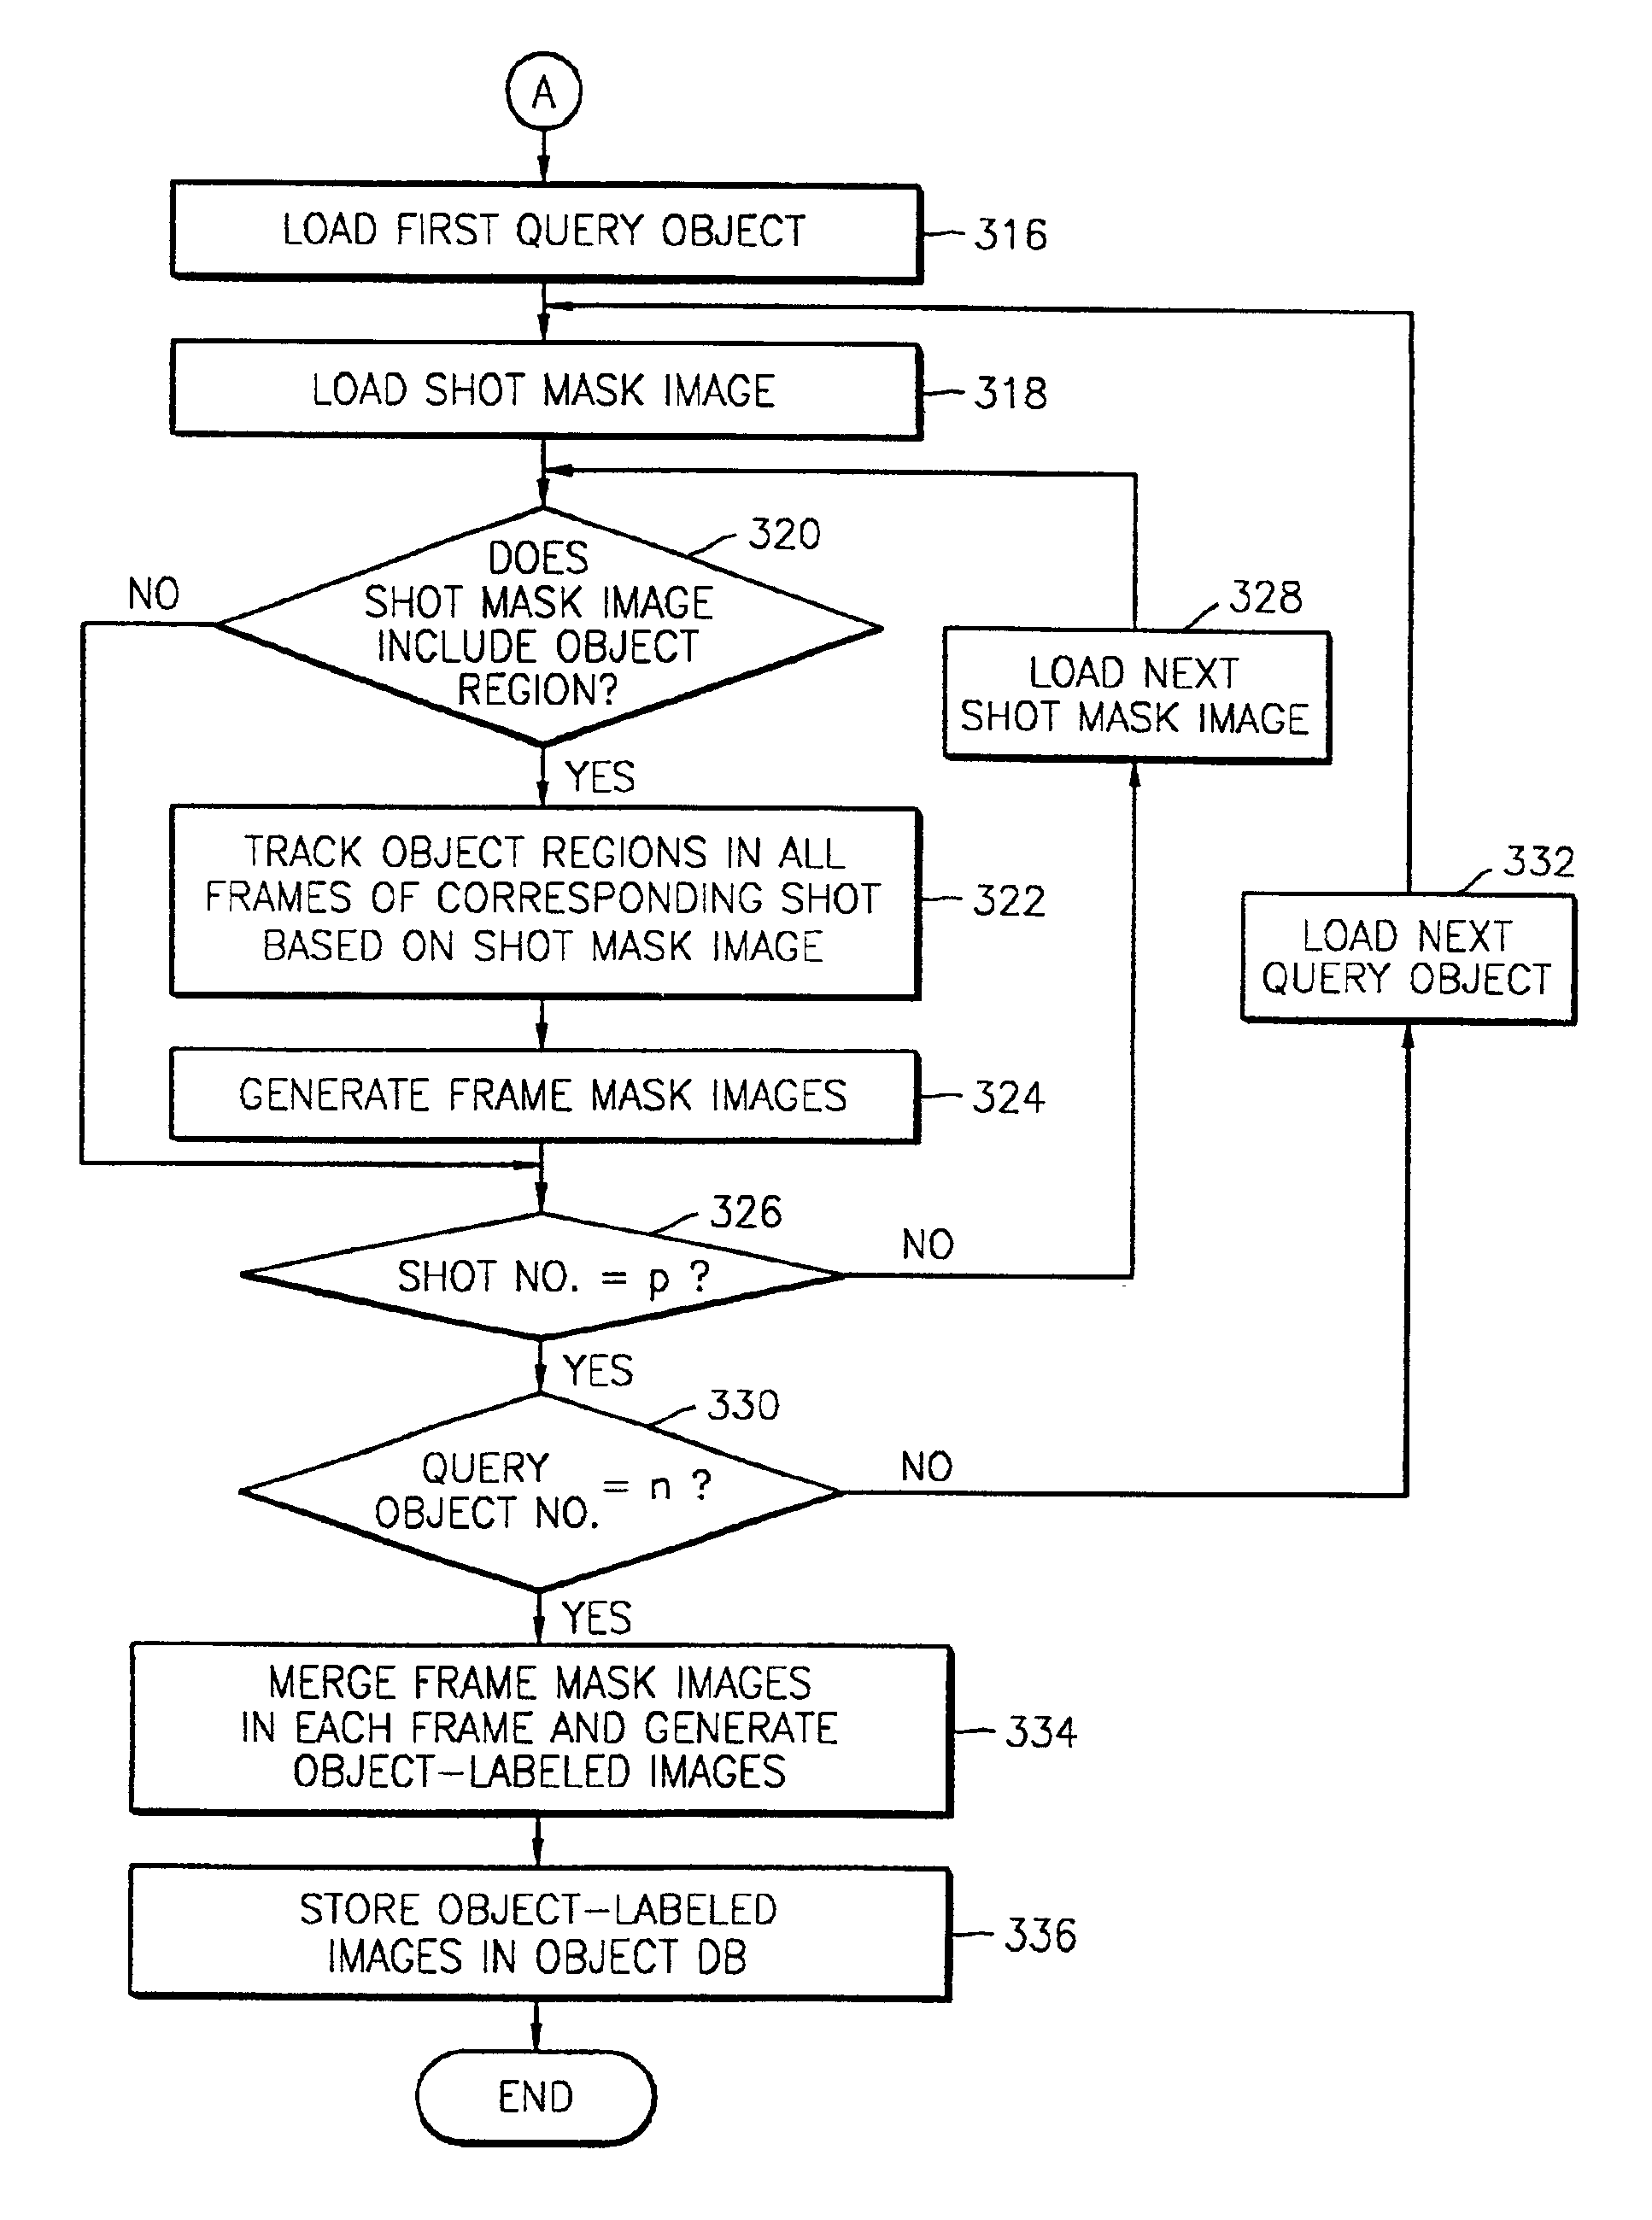 Apparatus and method for generating object-labeled image in video sequence